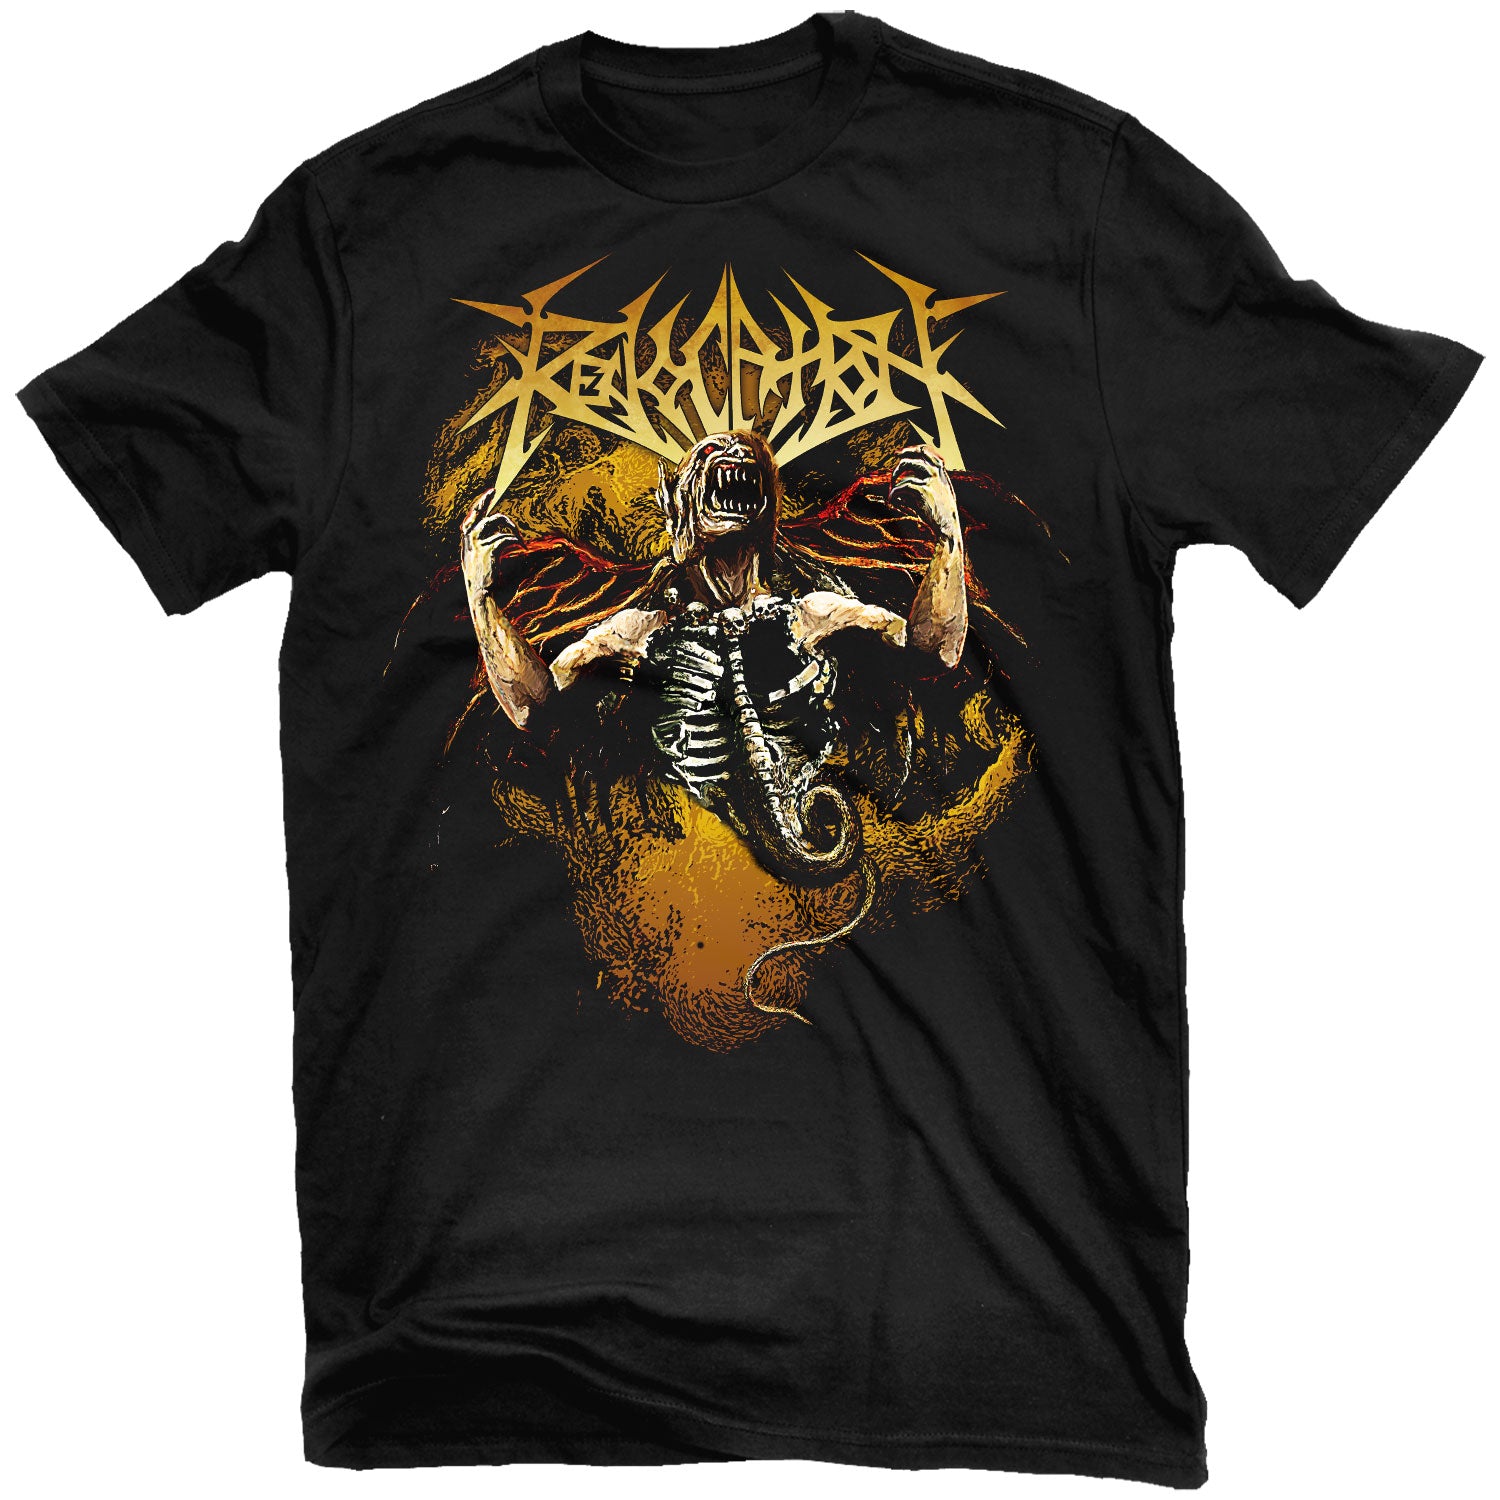 Revocation "Existence Is Futile" T-Shirt